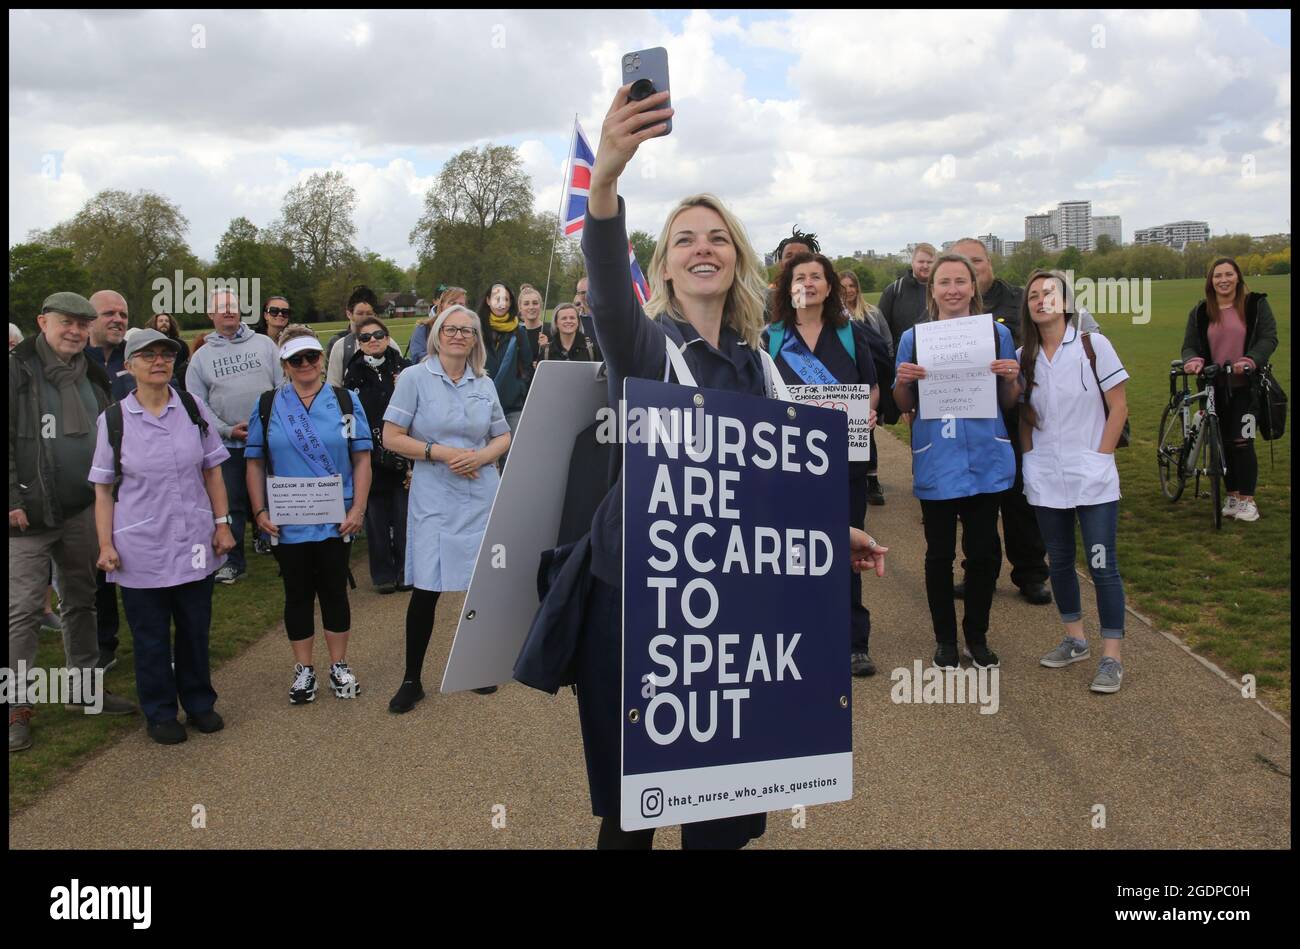 Nurse Jenna Platt takes a selfie with health professionals and their supporters in Hyde Park.Jenna is currently walking around the UK wearing a sandwich board that encourages debate, visiting all 69 cities to highlight how Covid care has left nurses unhappy and too scared to question policy for fear of losing their jobs. Some health workers have spoken of bullying, coercion and being ostracised. Many feel if they ask questions, they are seen as being part of the problem. Jenna delivered a letter of complaint to The Nursing Midwifery Council in London before she embarked on her city tour, askin Stock Photo